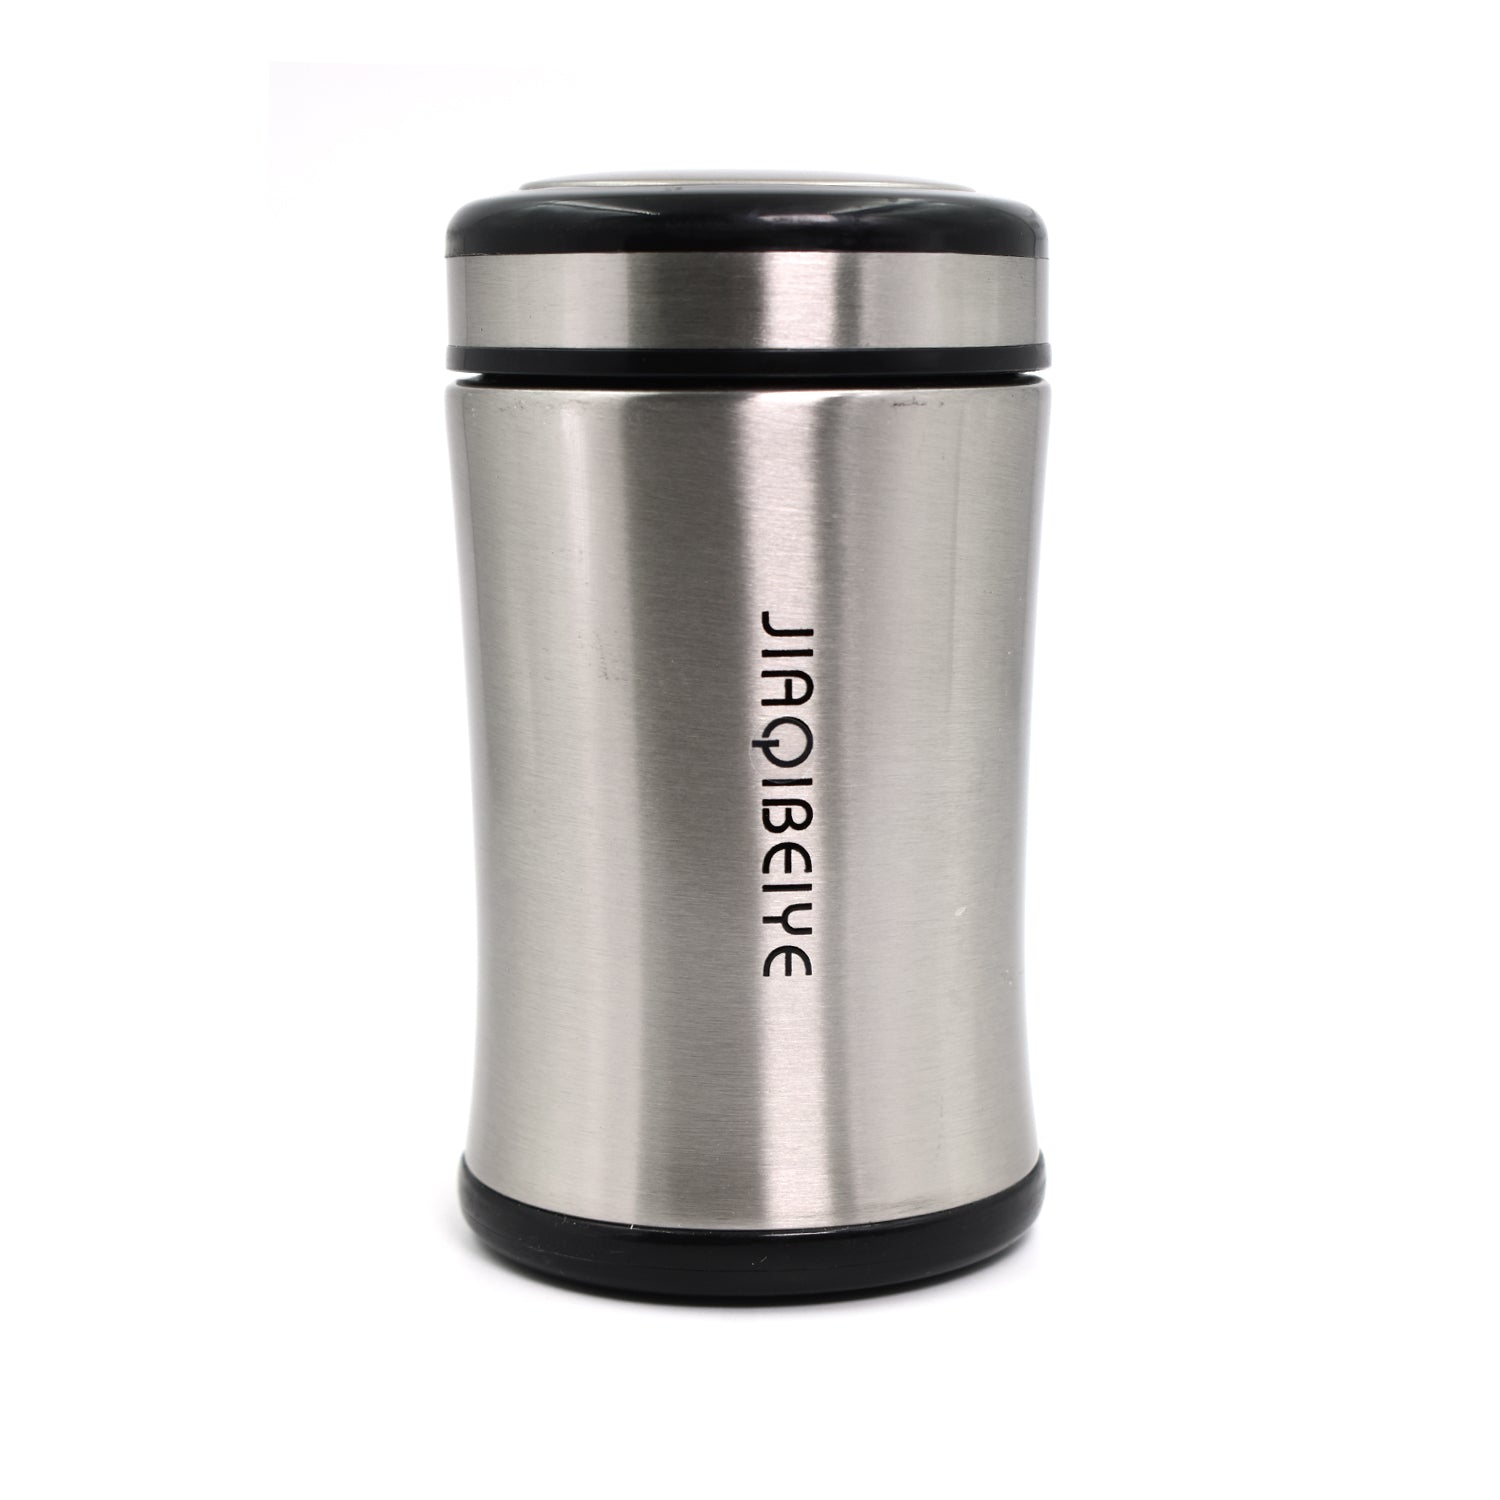 6420 Stainless steel Bottles 300Ml Approx. For Storing Water And Some Other Types Of Beverages Etc. 